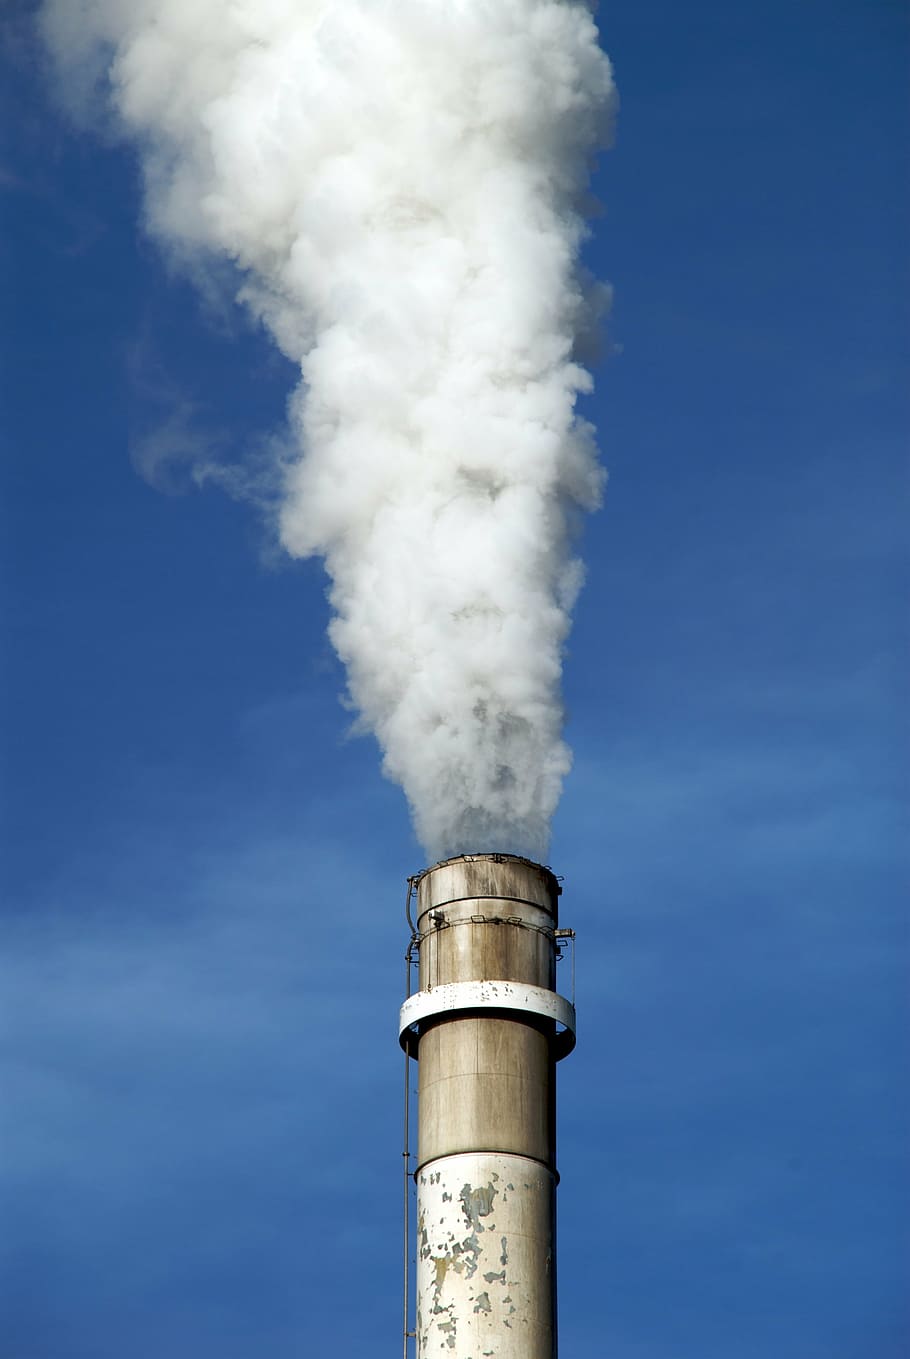 chimney, emitting, smoke, clear, sky, industrial, factory, chemical, pollution, steam